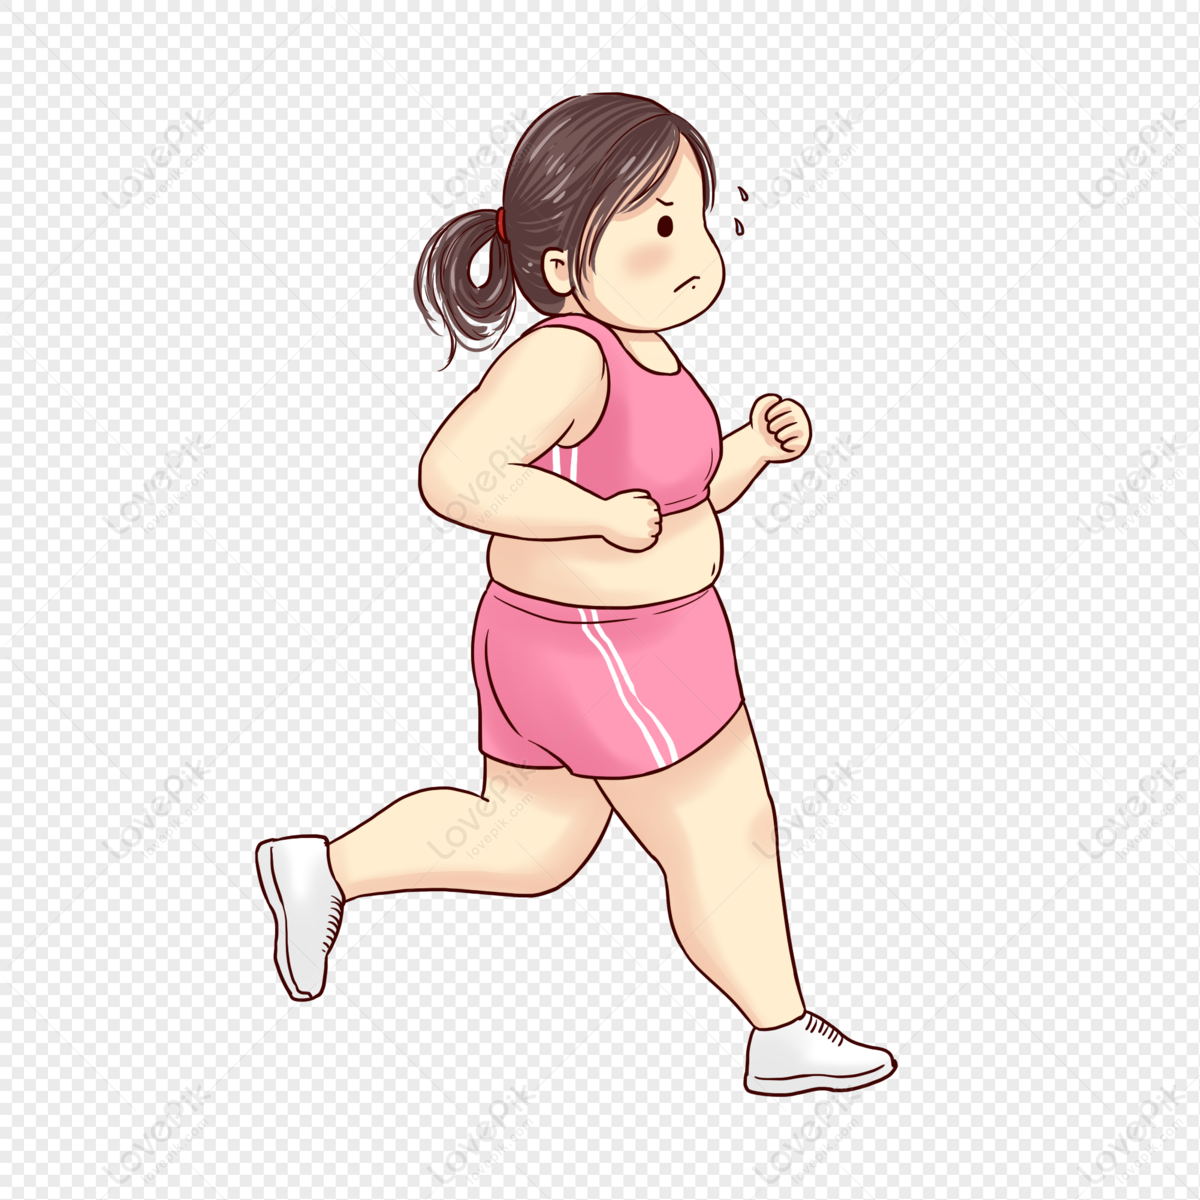 Fat Girl Losing Weight PNG Transparent And Clipart Image For Free Download  - Lovepik | 401273596